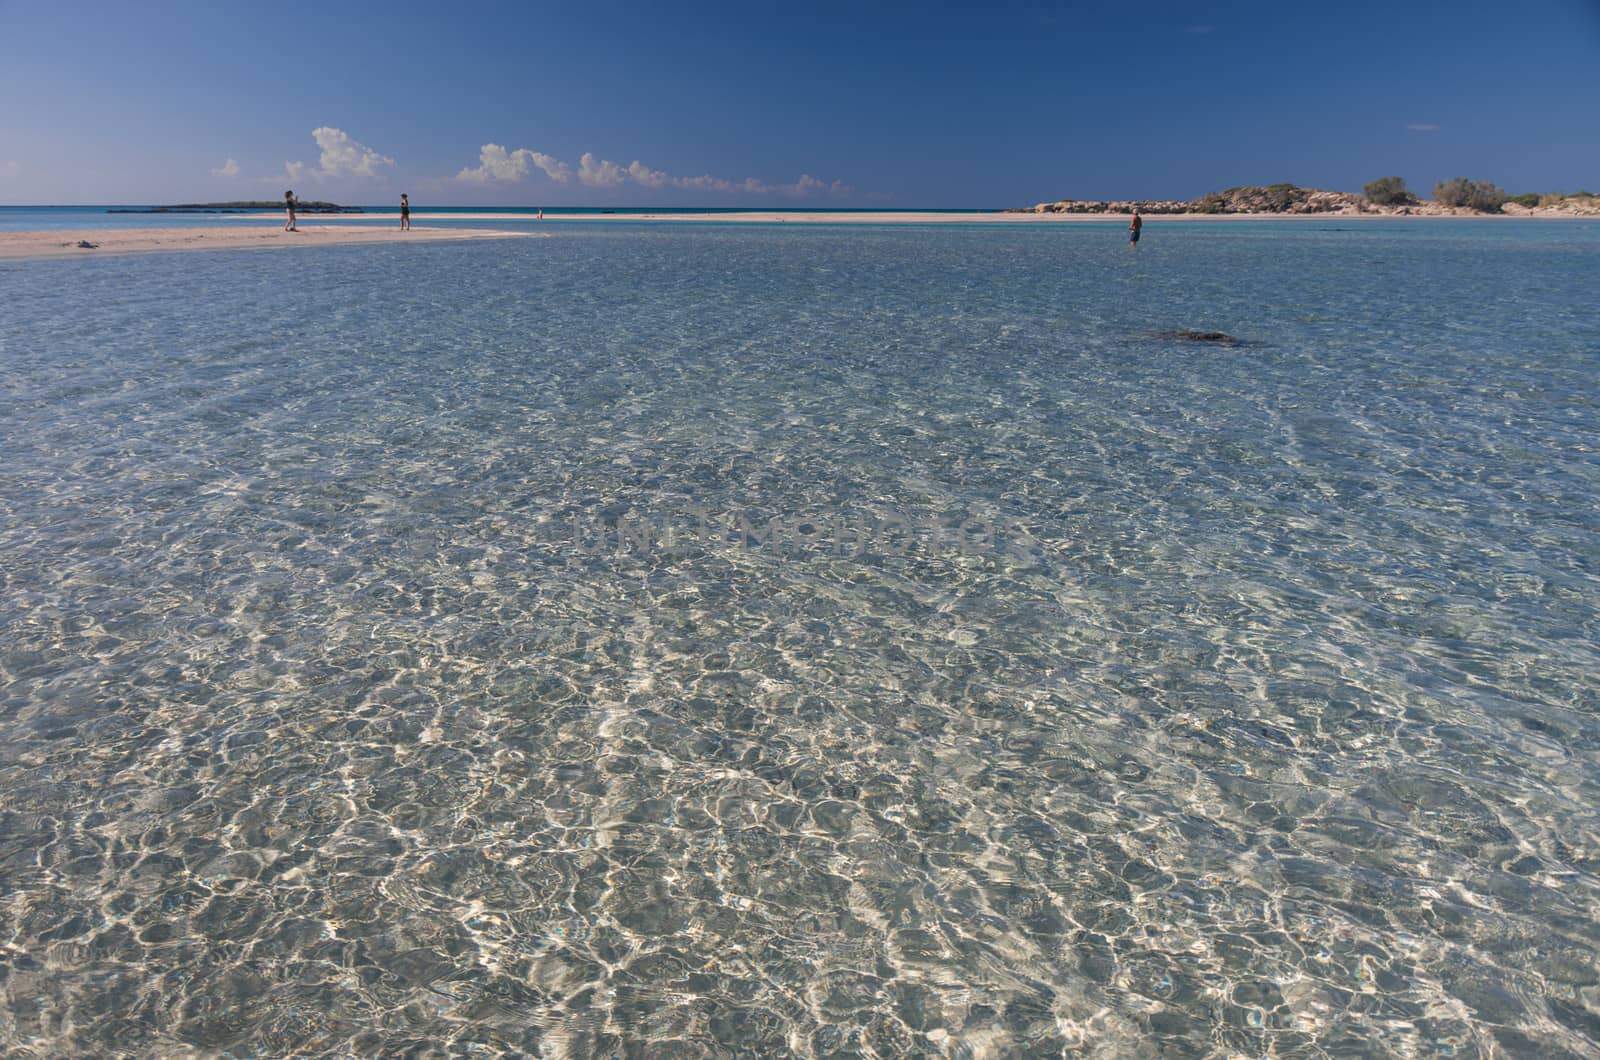 The transparent waters of Elafonisi in Crete island